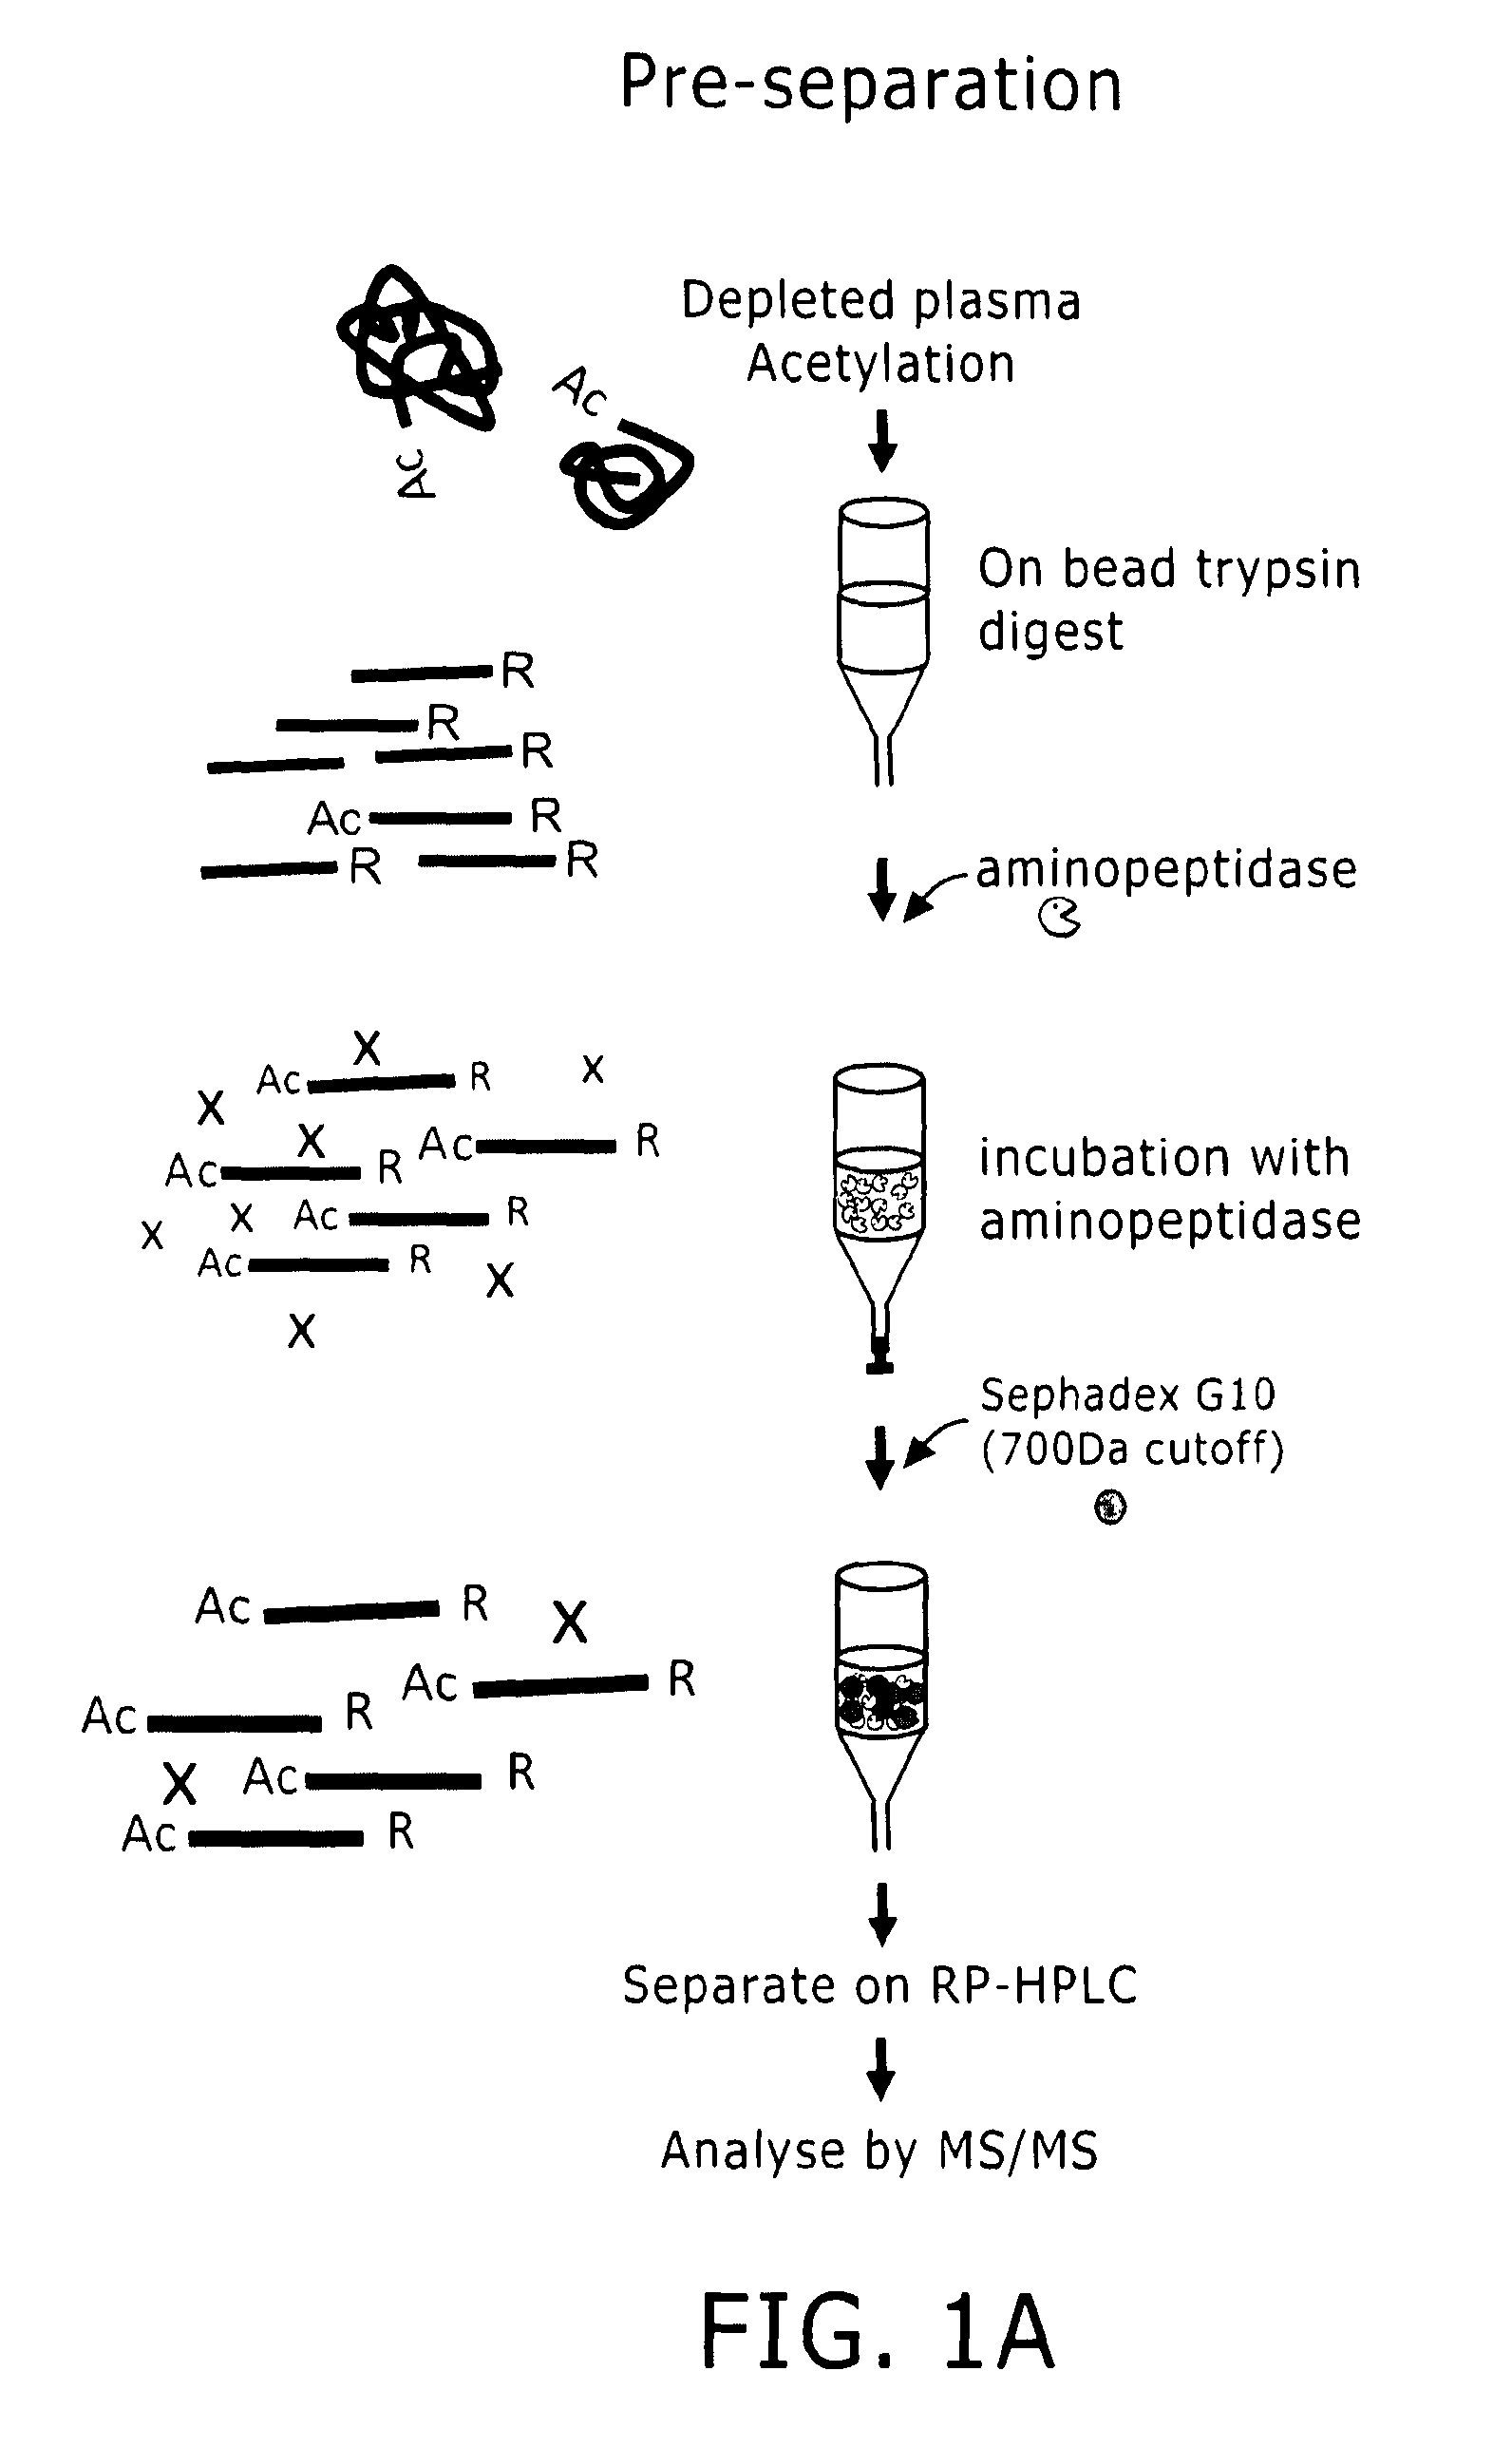 Preparation of samples for proteome analysis